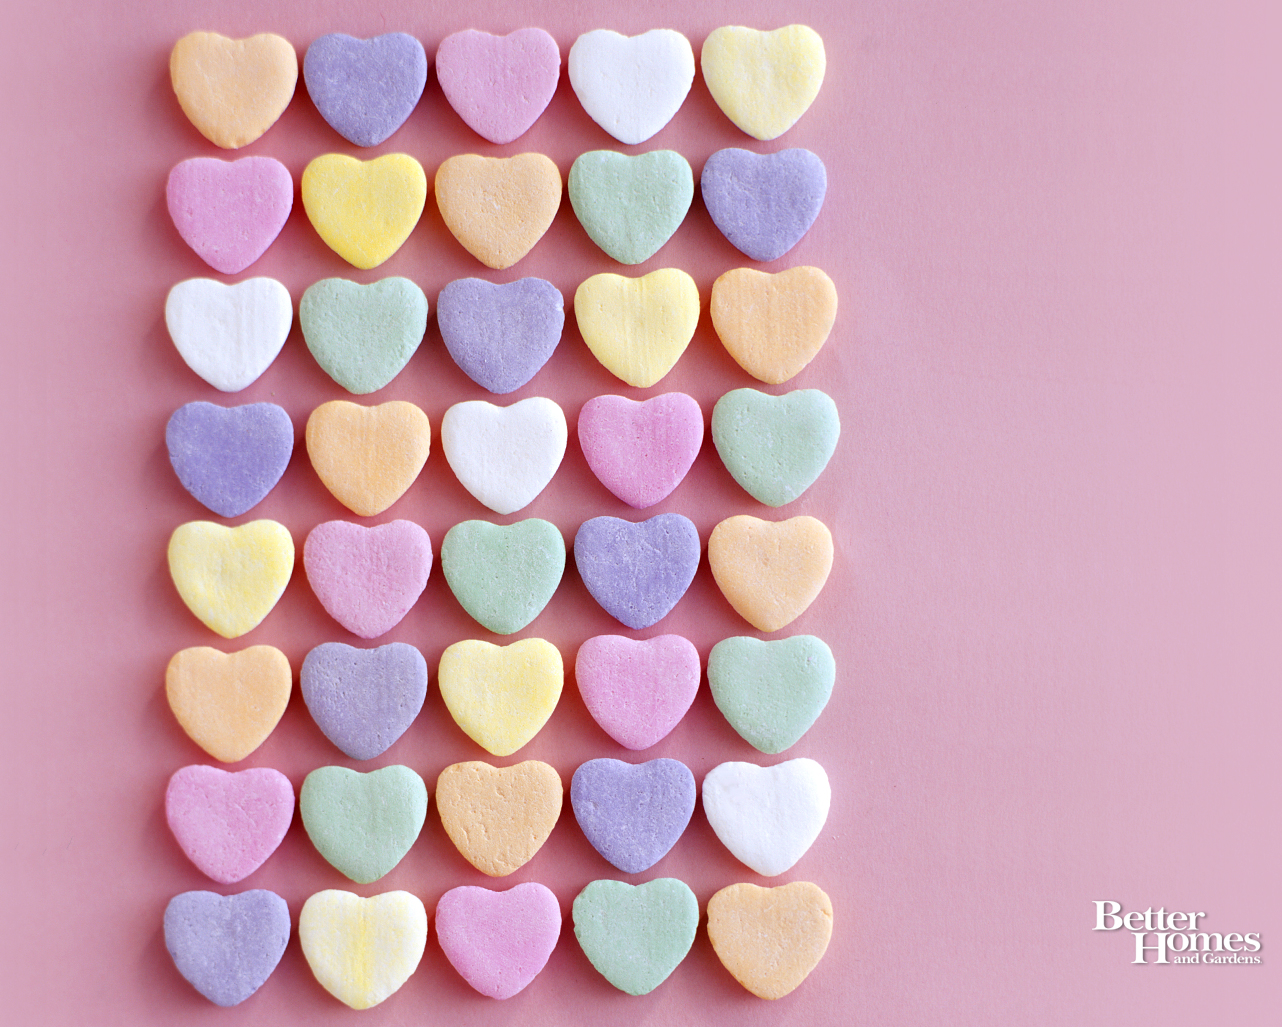 Celebrate Love with 14 Valentine's Day Desktop Wallpapers